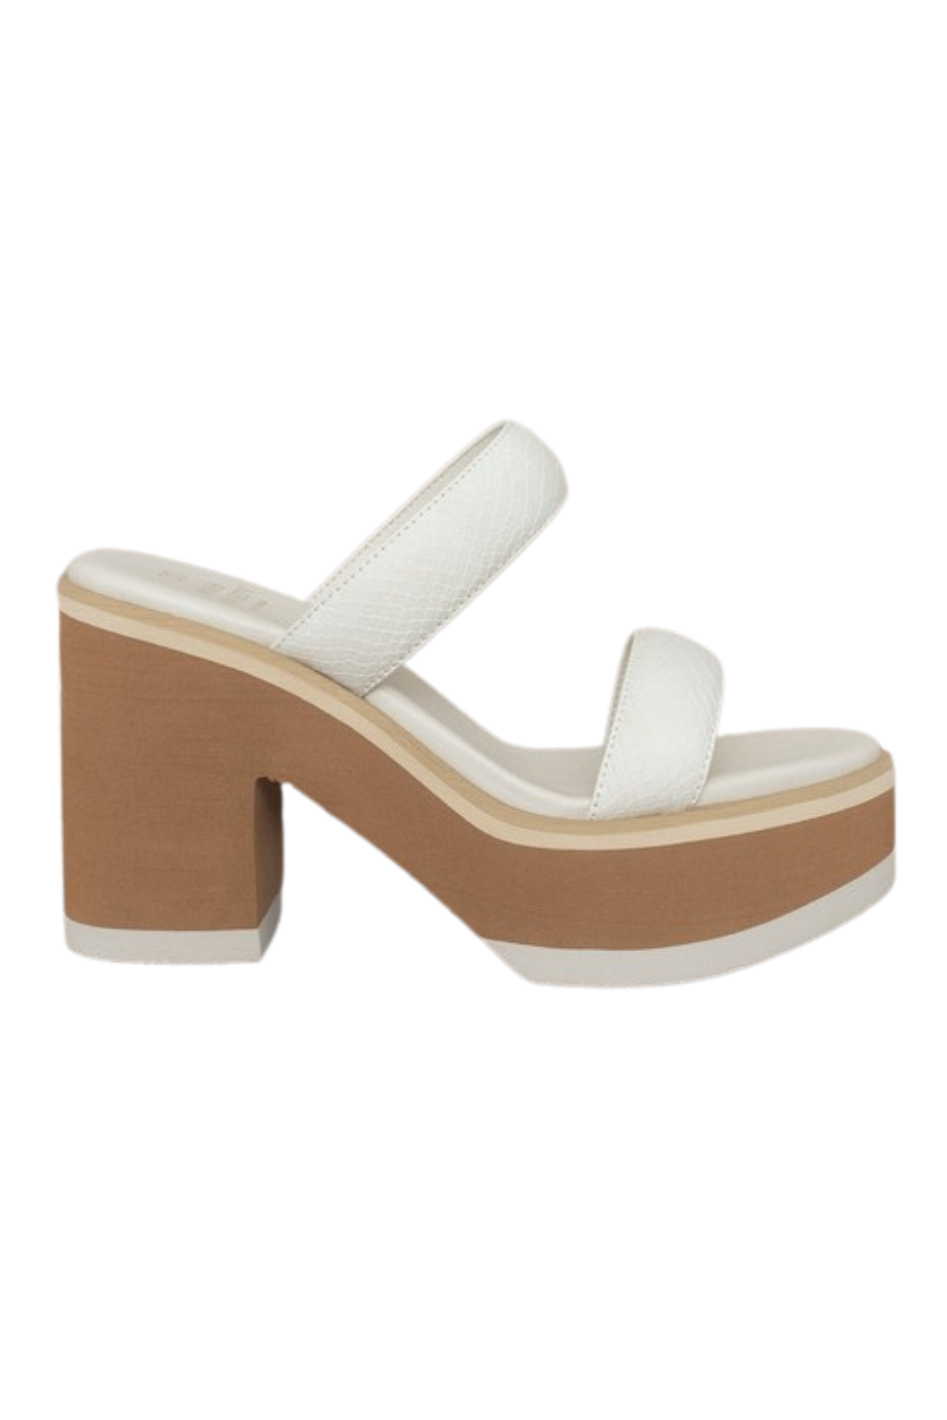 Daphne Chunky Heeled Sandal - Expressive Collective CO.